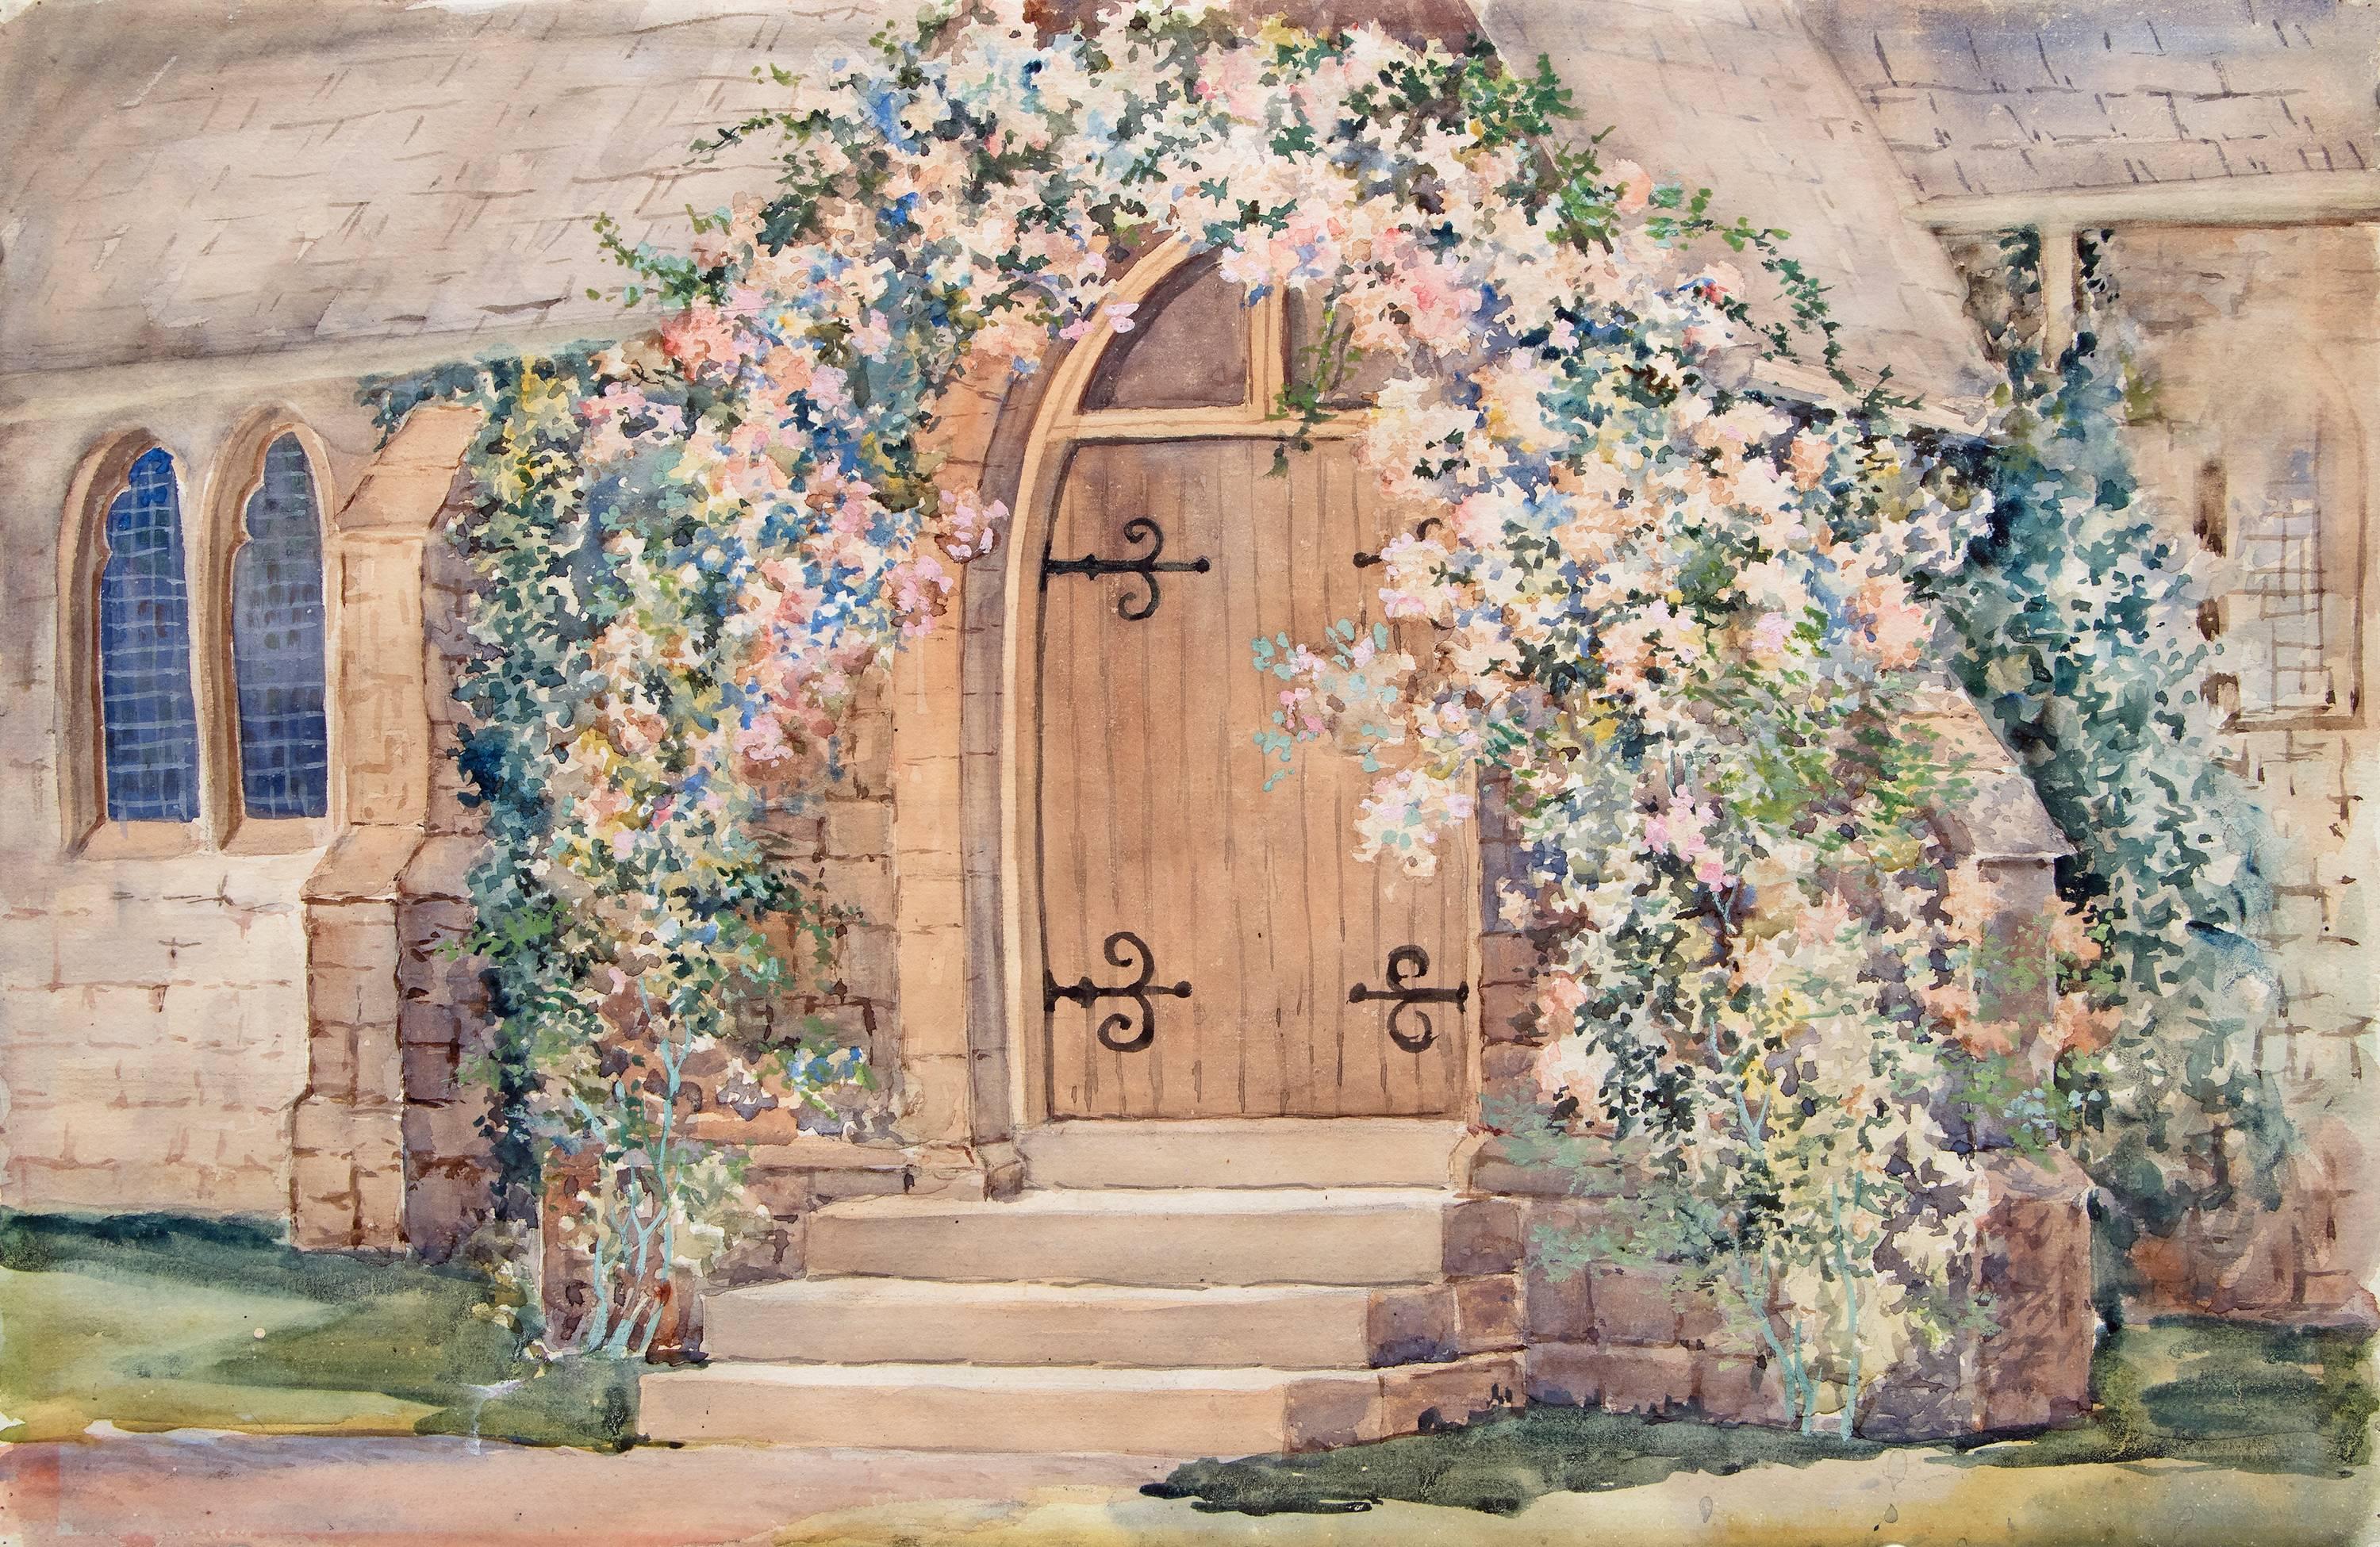 St. Andrew's Episcopal Church, Flowering Vines, Manitou, Colorado, Circa 1915 - Painting by Maude Leach